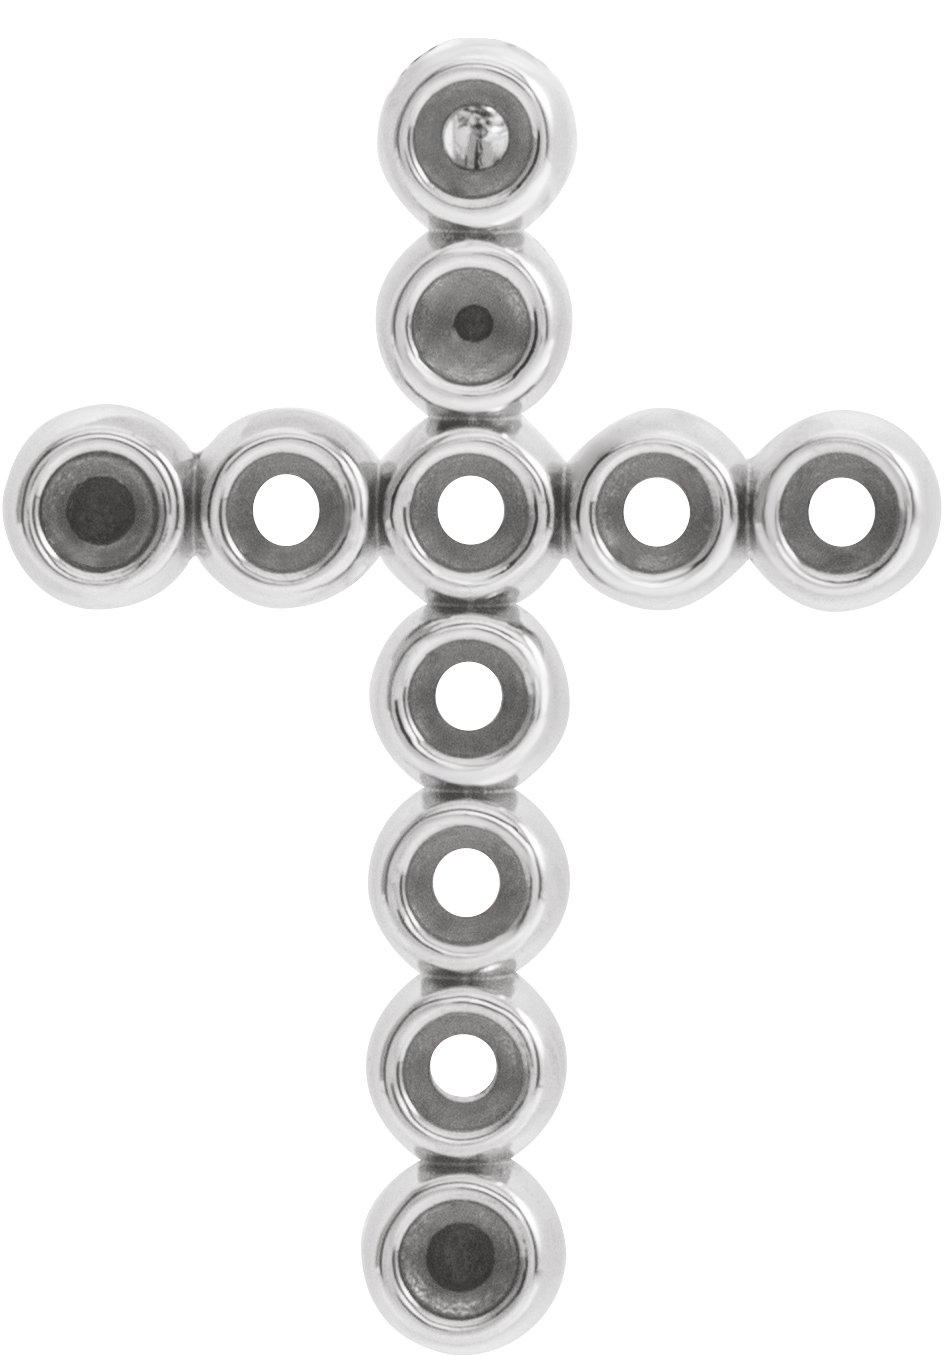 None / Pendant / Sterling Silver / 20.68X14.85 Mm / Polished / Bezel-Set Cross Pendant Mounting